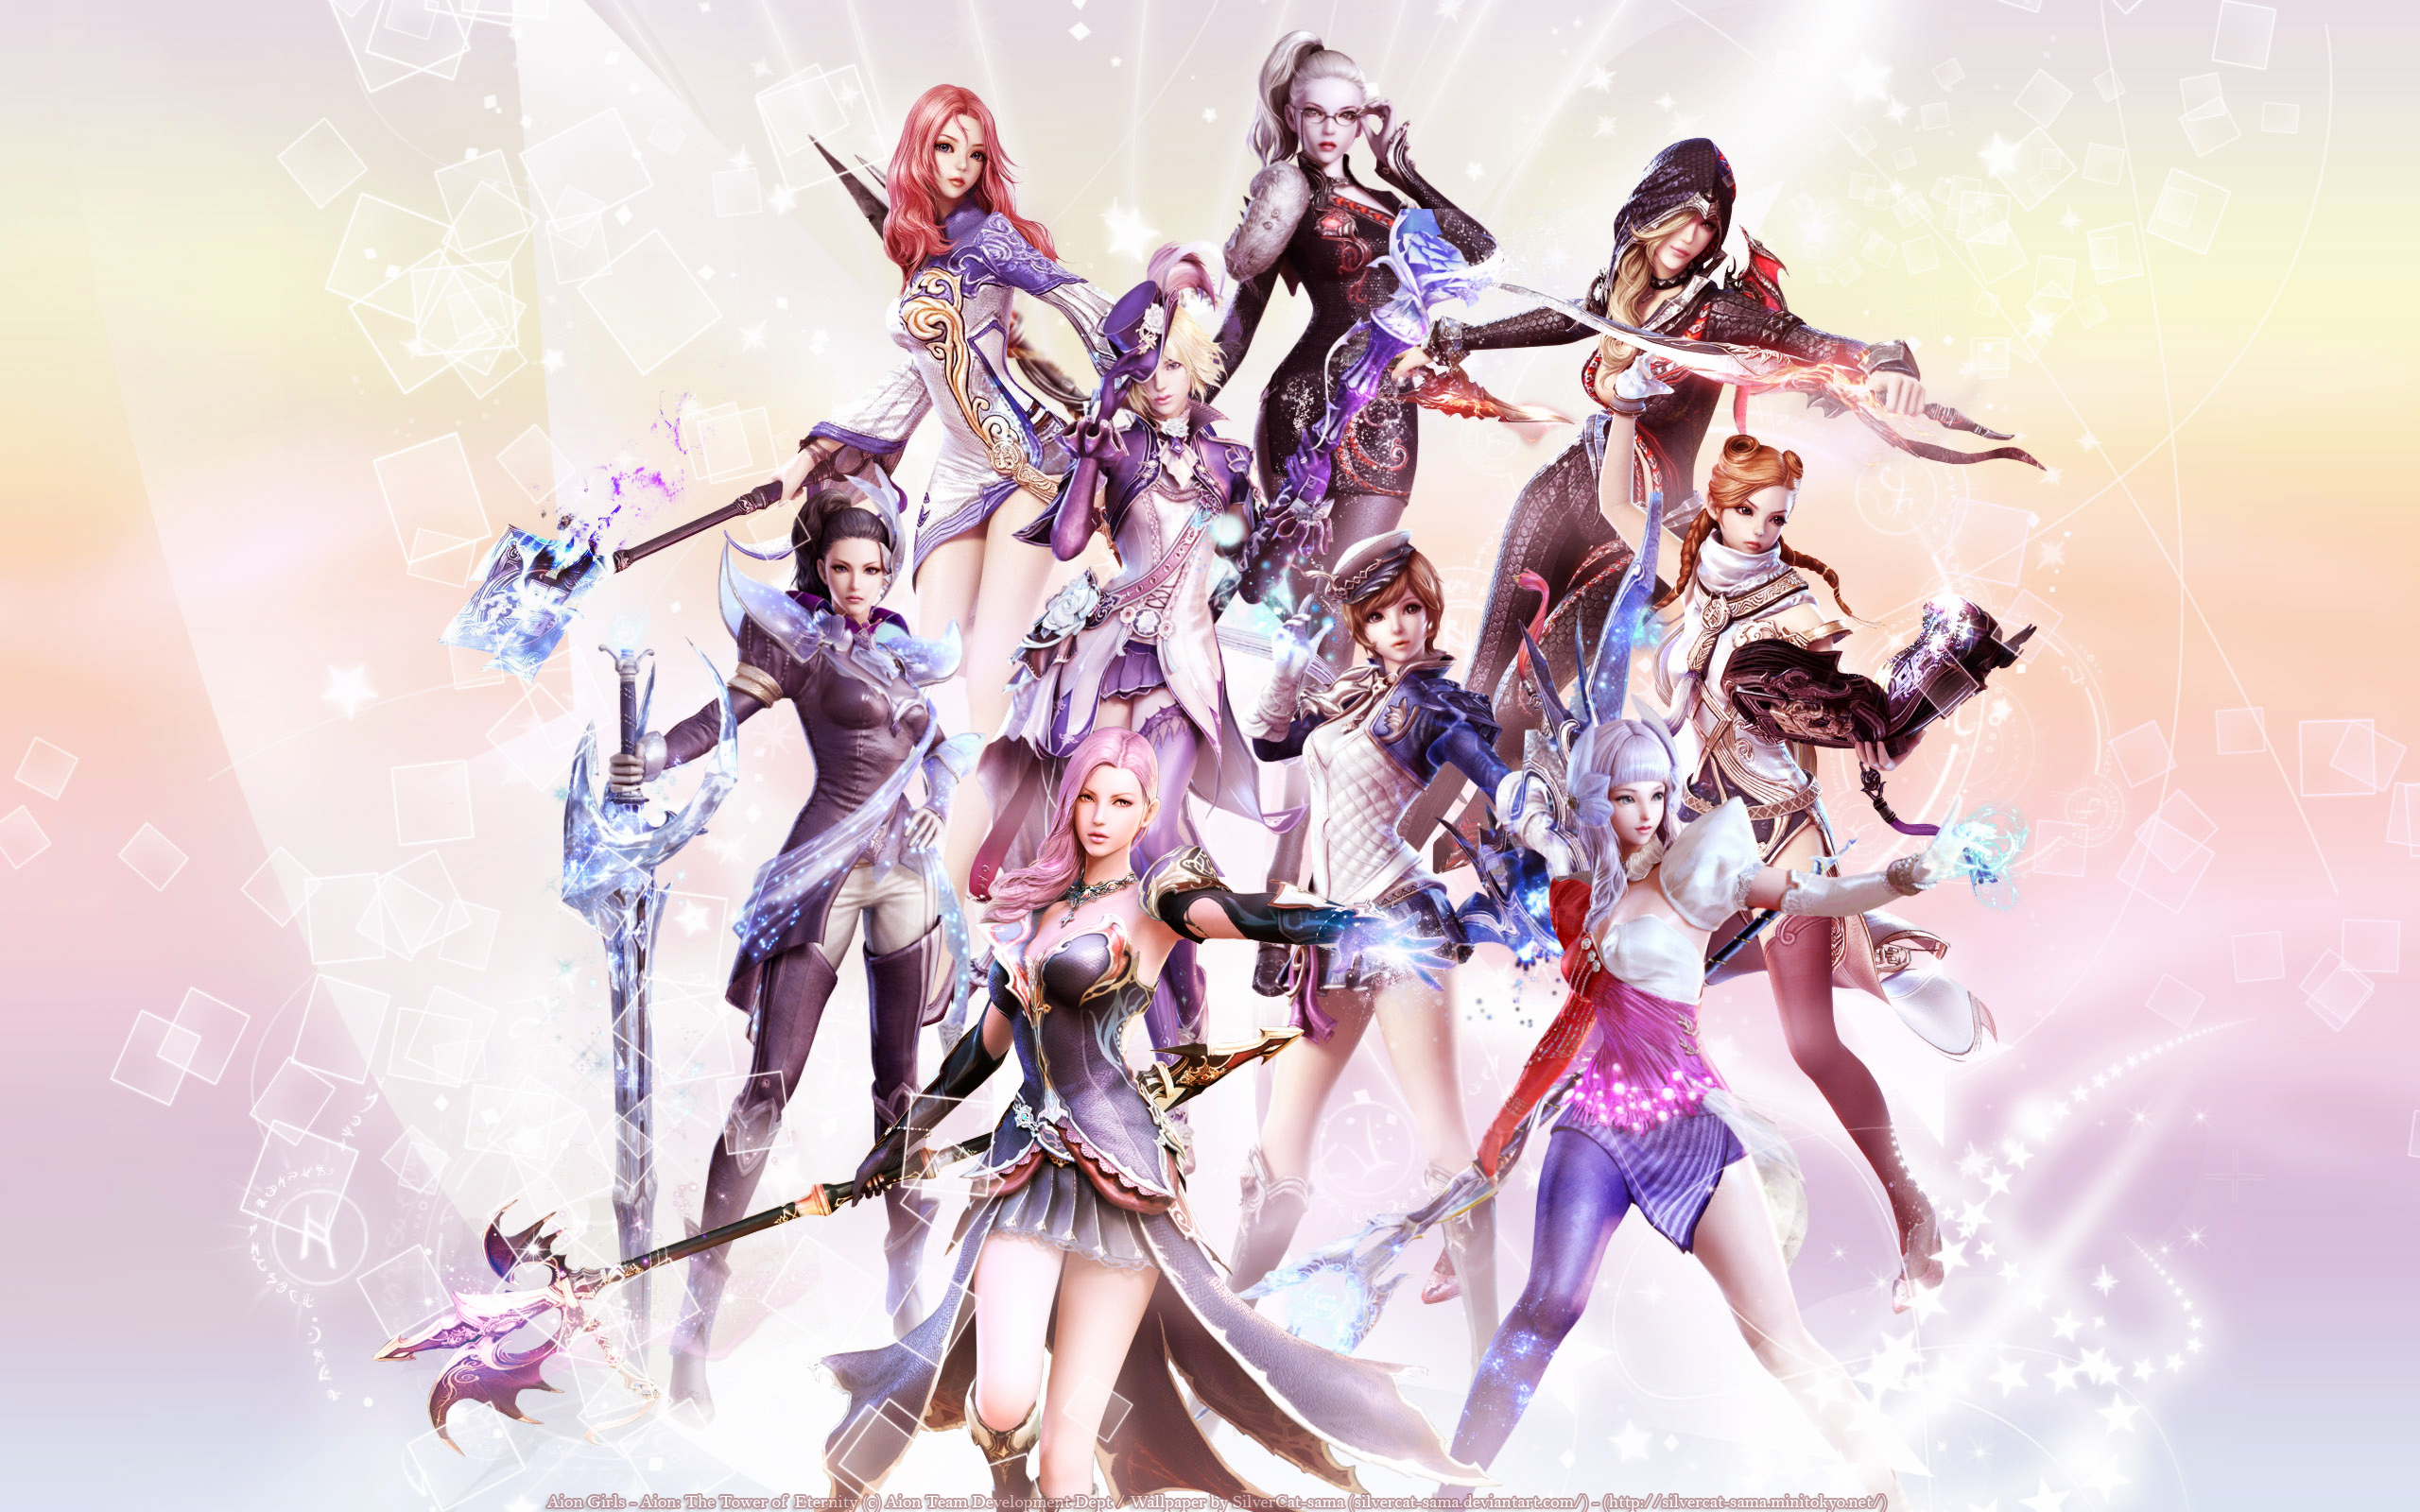 Video Game Aion Tower Of Eternity 2560x1600